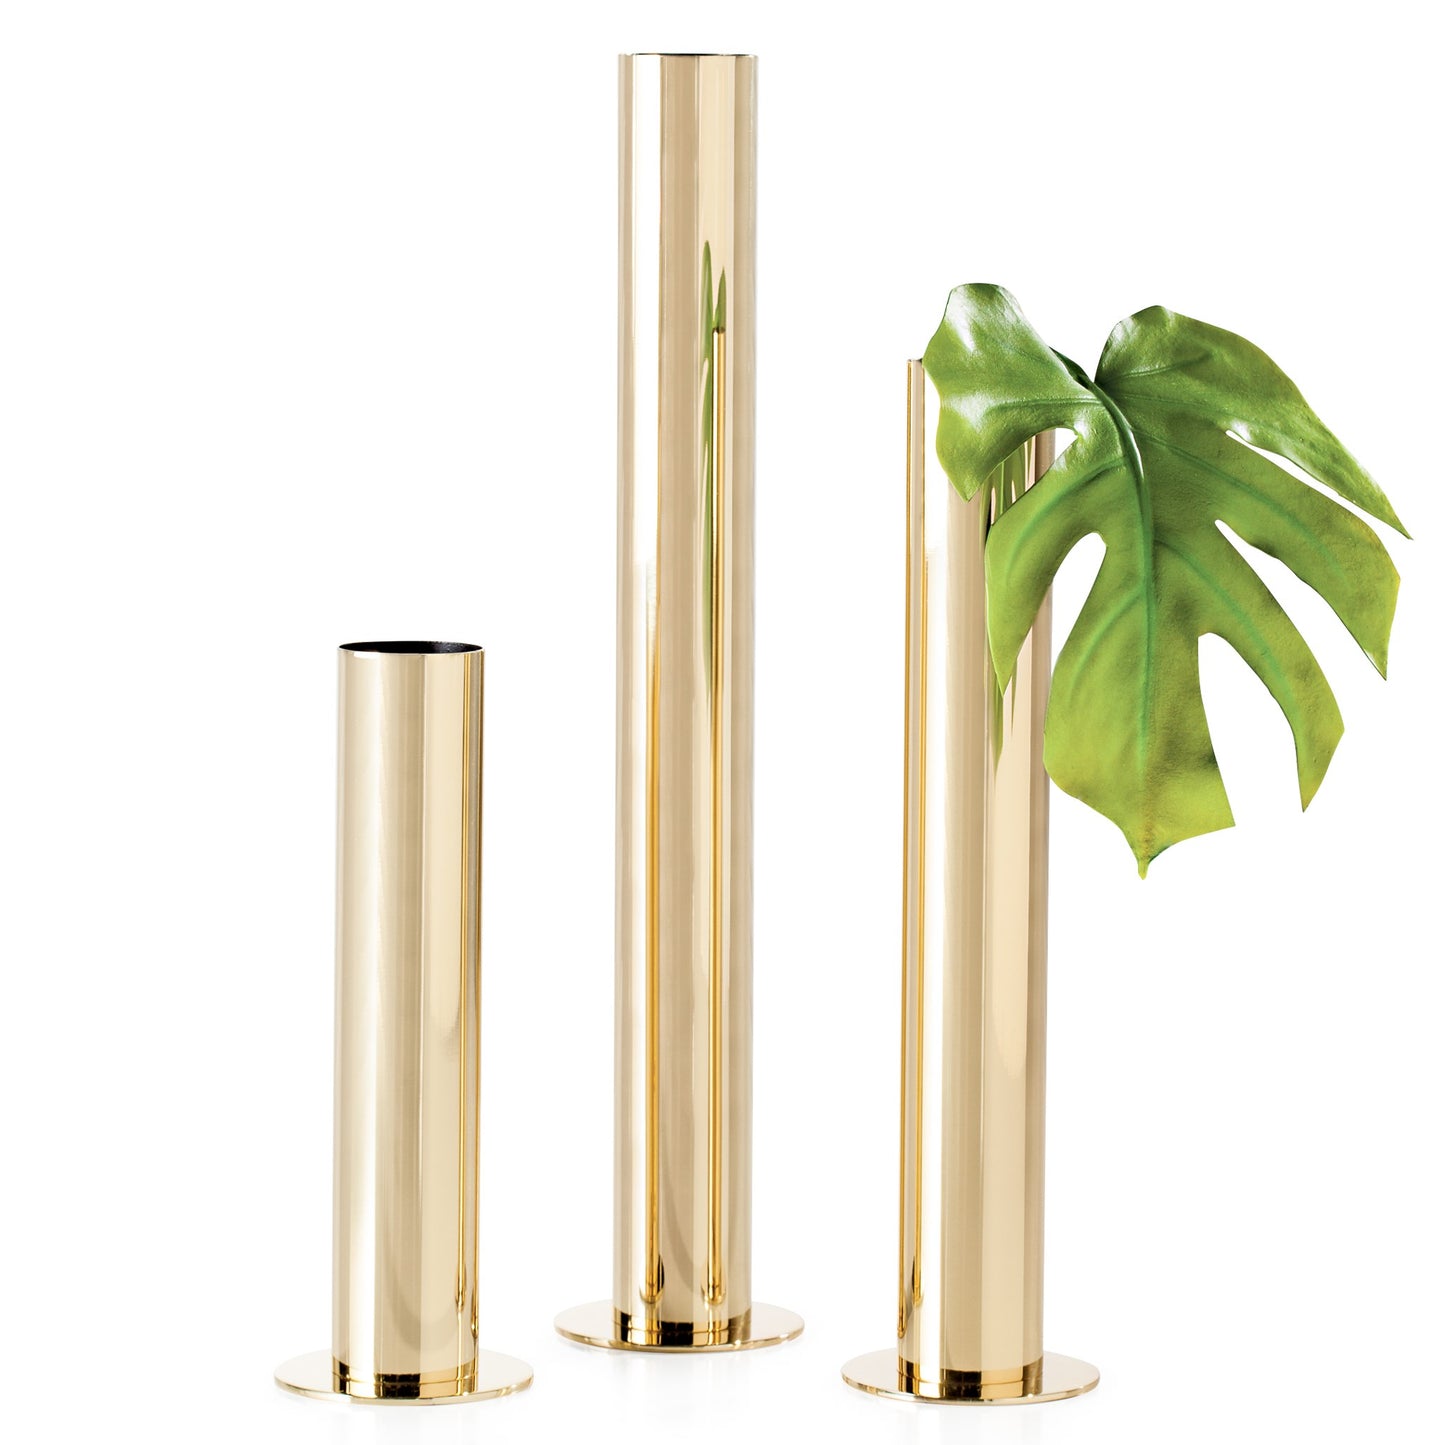 Stainless Steel 3 Piece Pipe Vase Set - Gold Table Top Vase